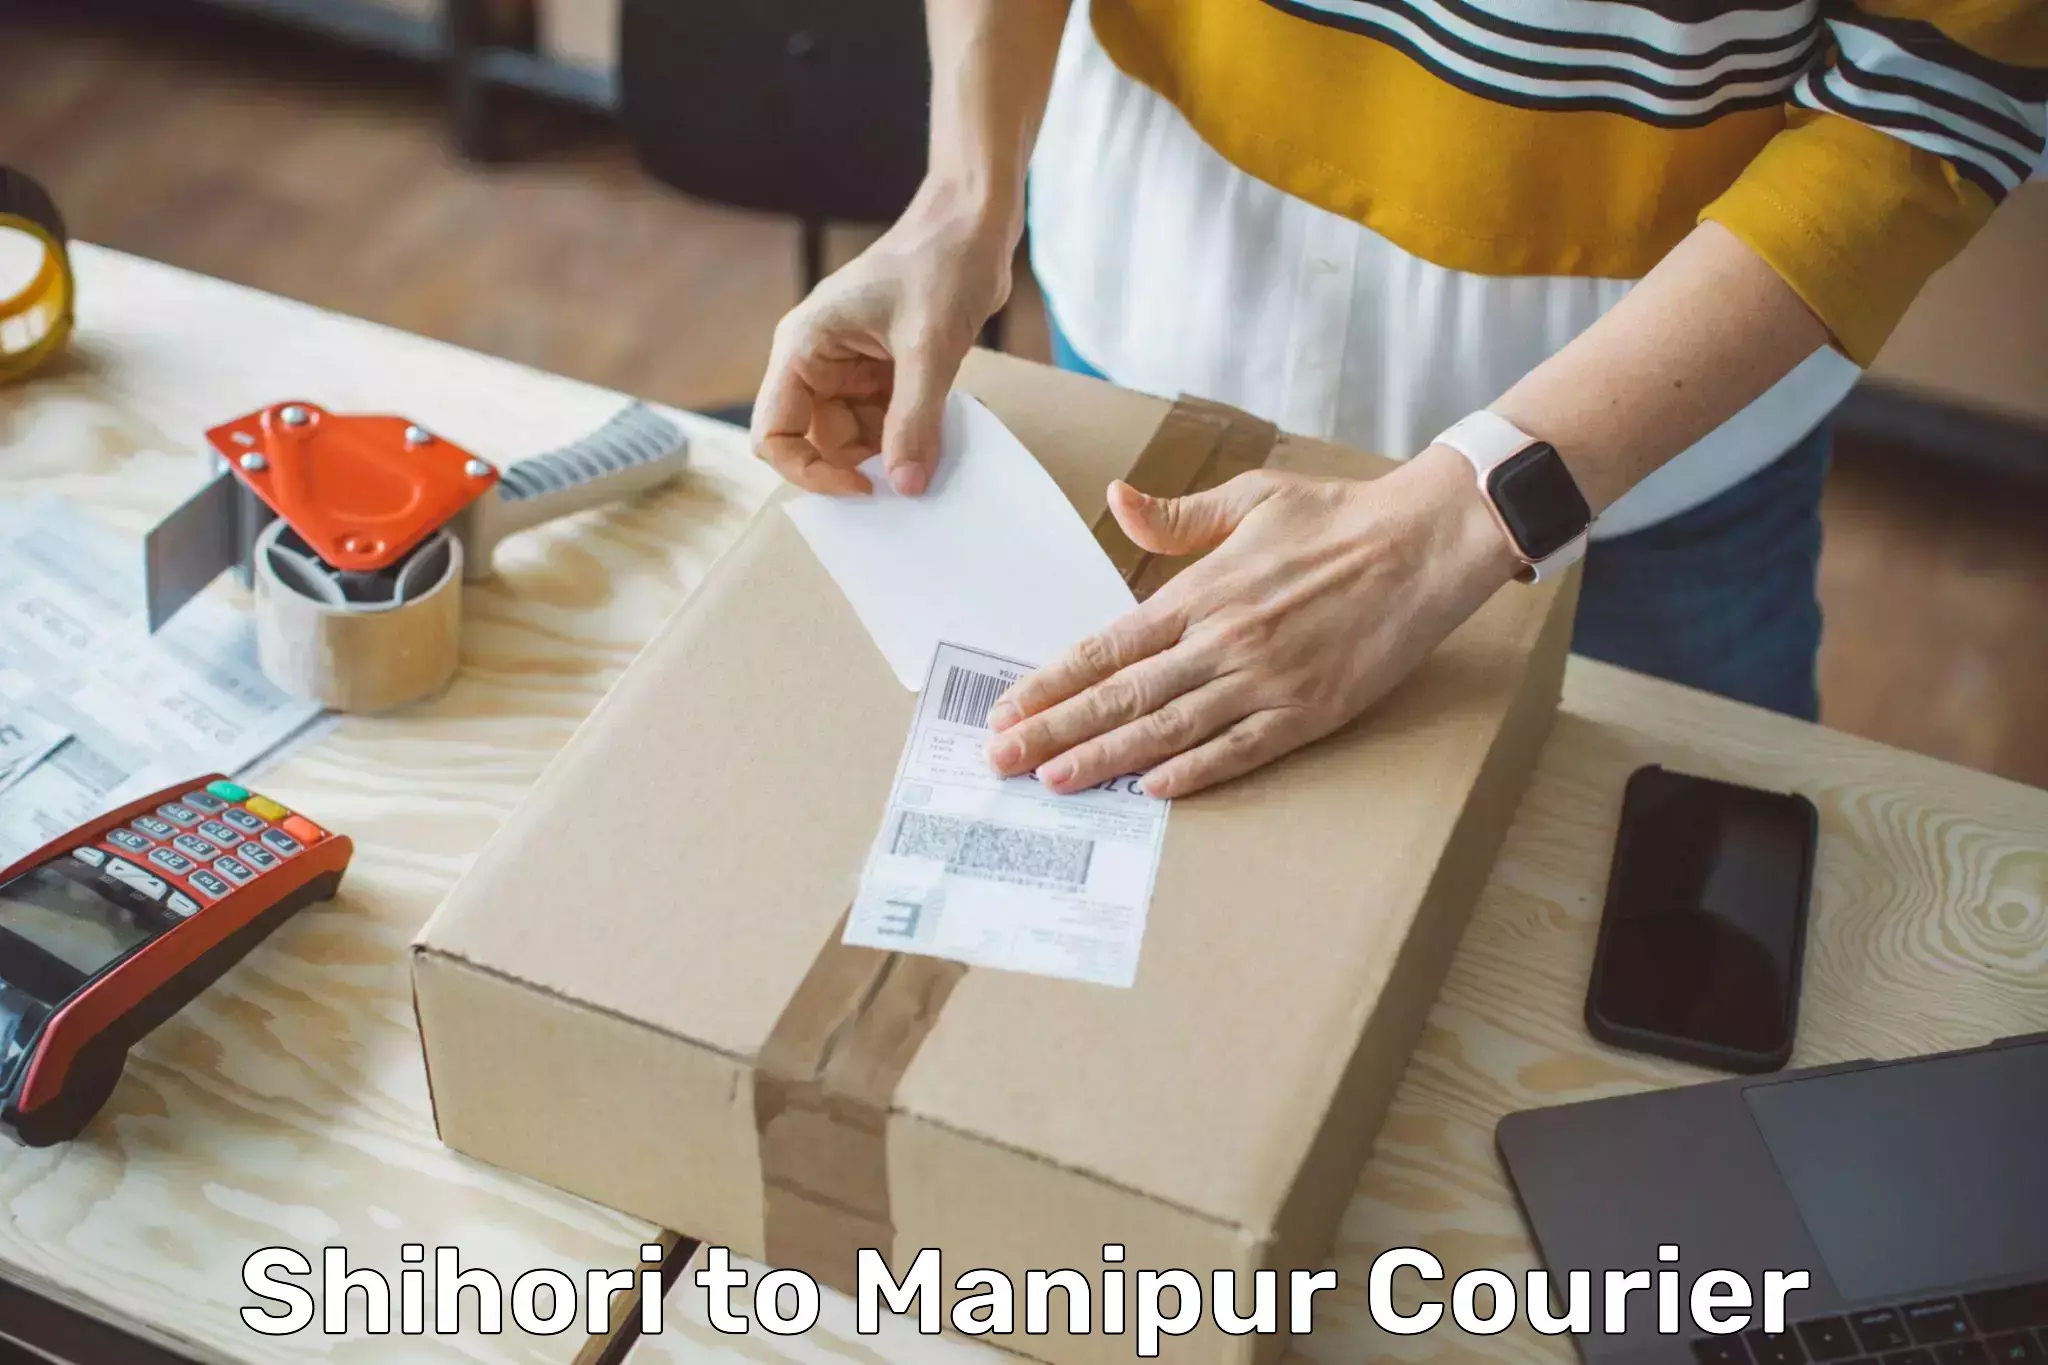 Parcel service for businesses Shihori to Manipur